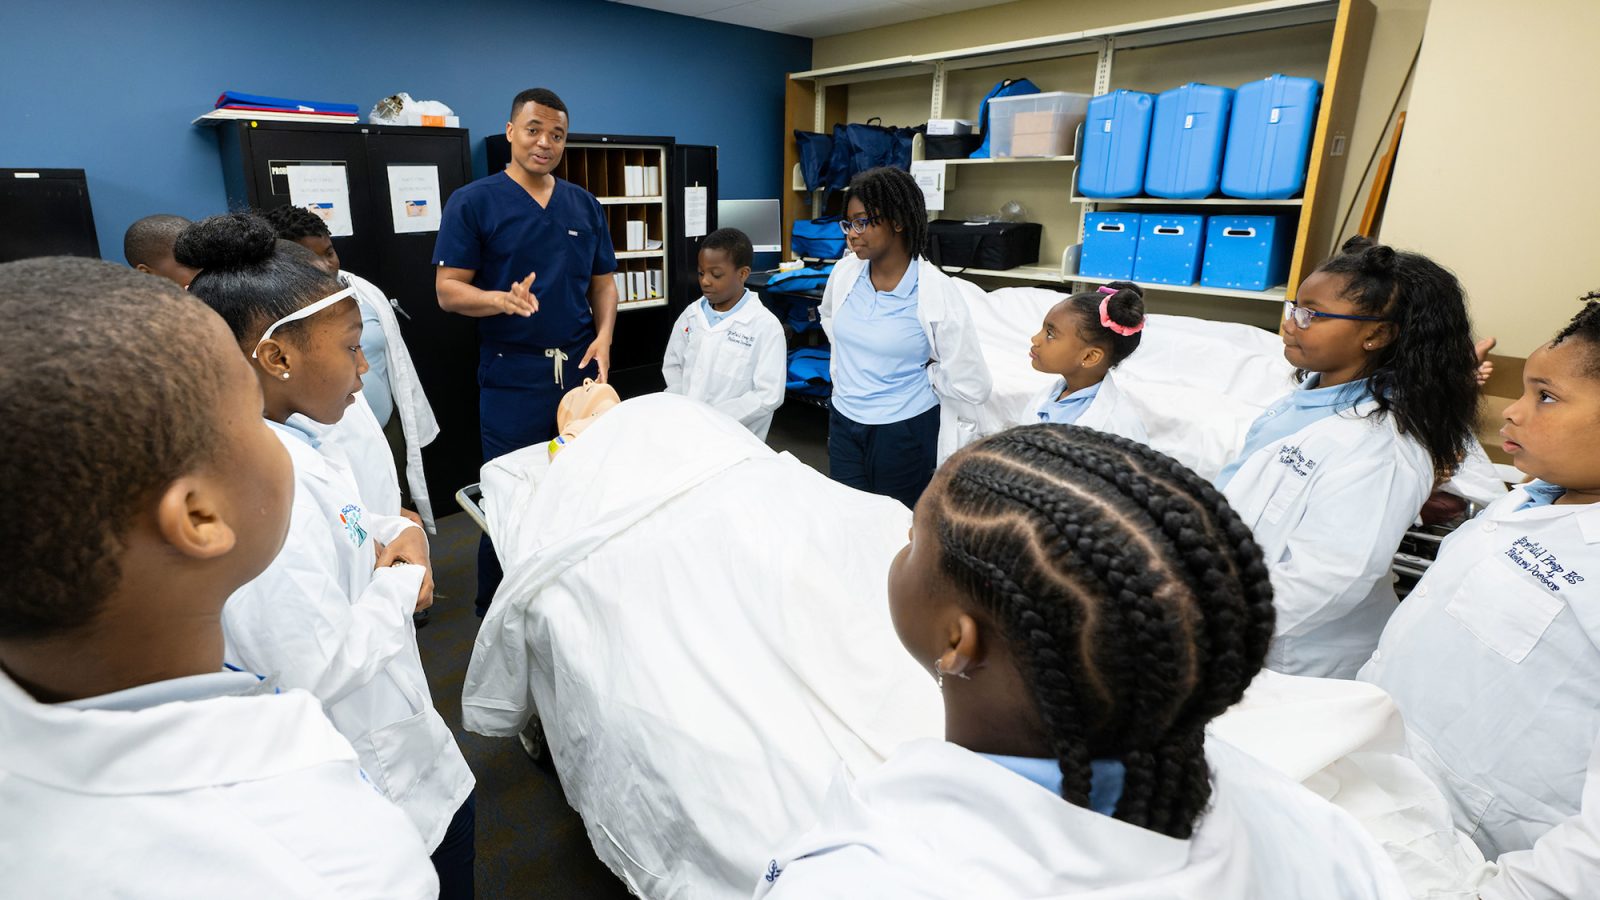 A group of fourth-grade students gather around a hospital bed for a medical discussion with first-year medical students at Georgetown.